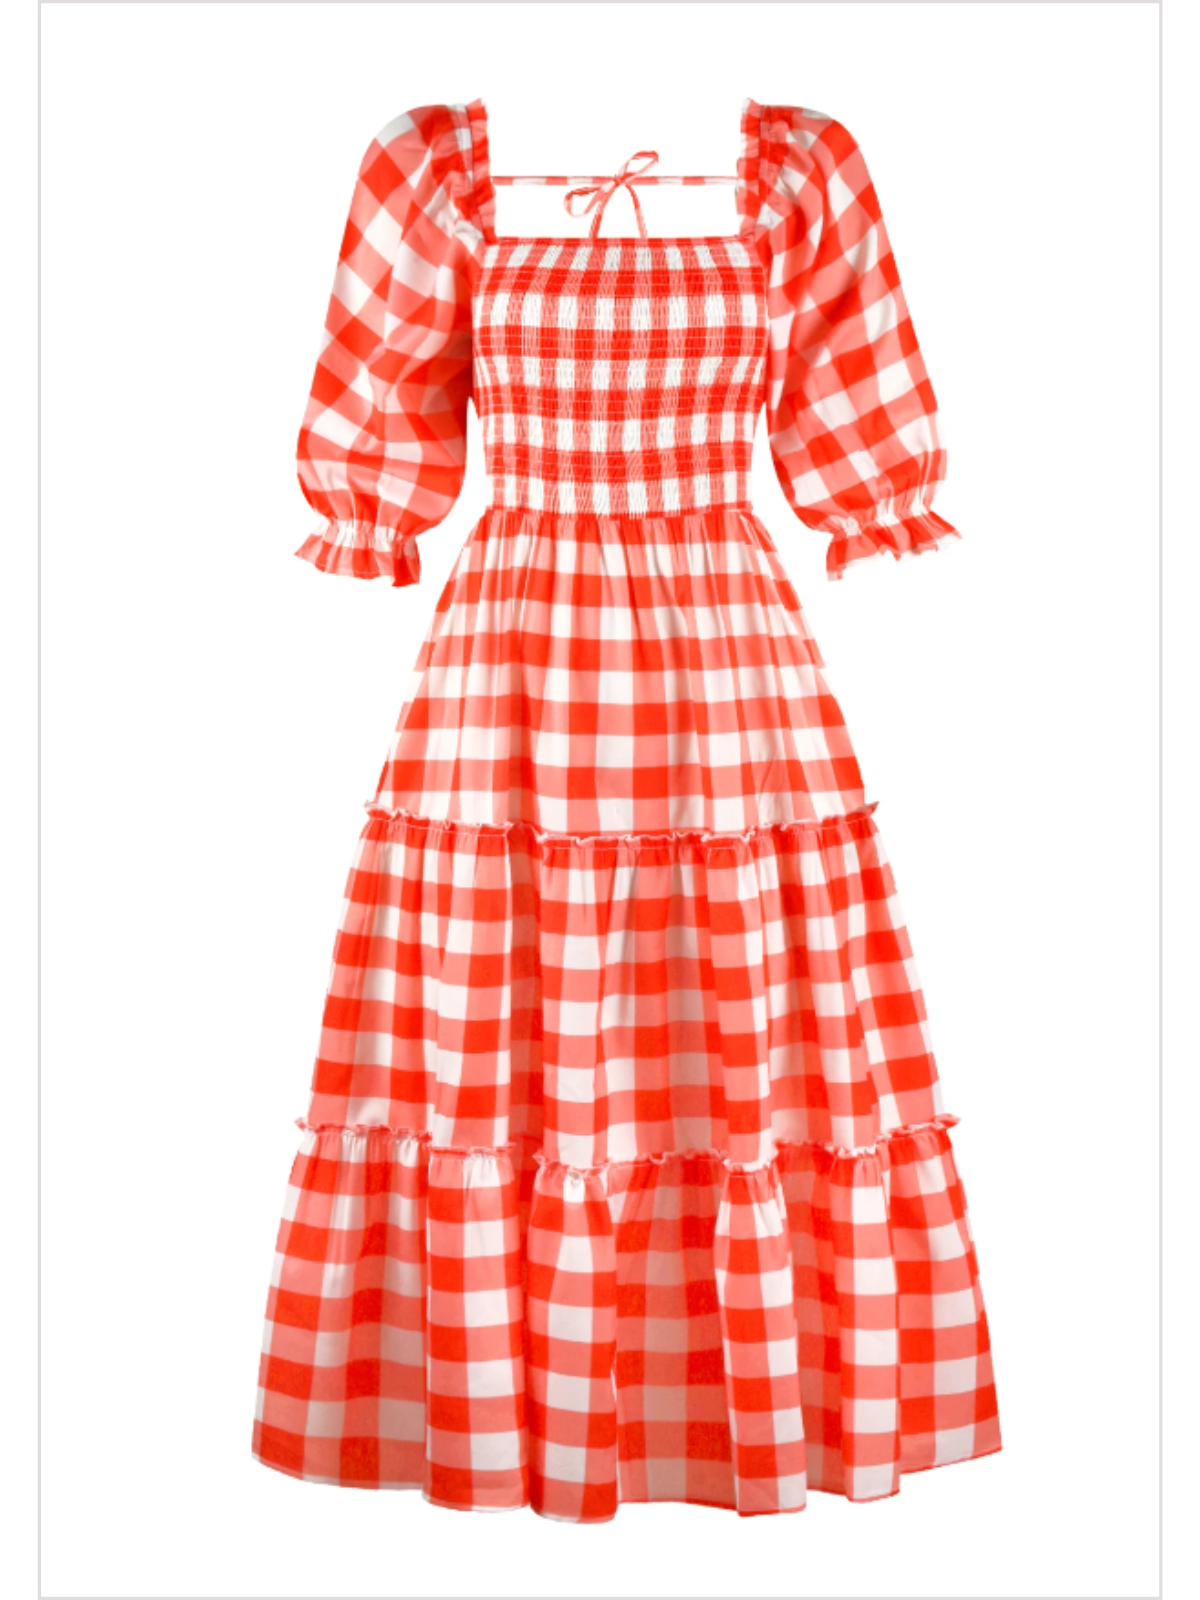 Mia Belle Girls Red Gingham Smocked Dress | Mommy and Me Dresses